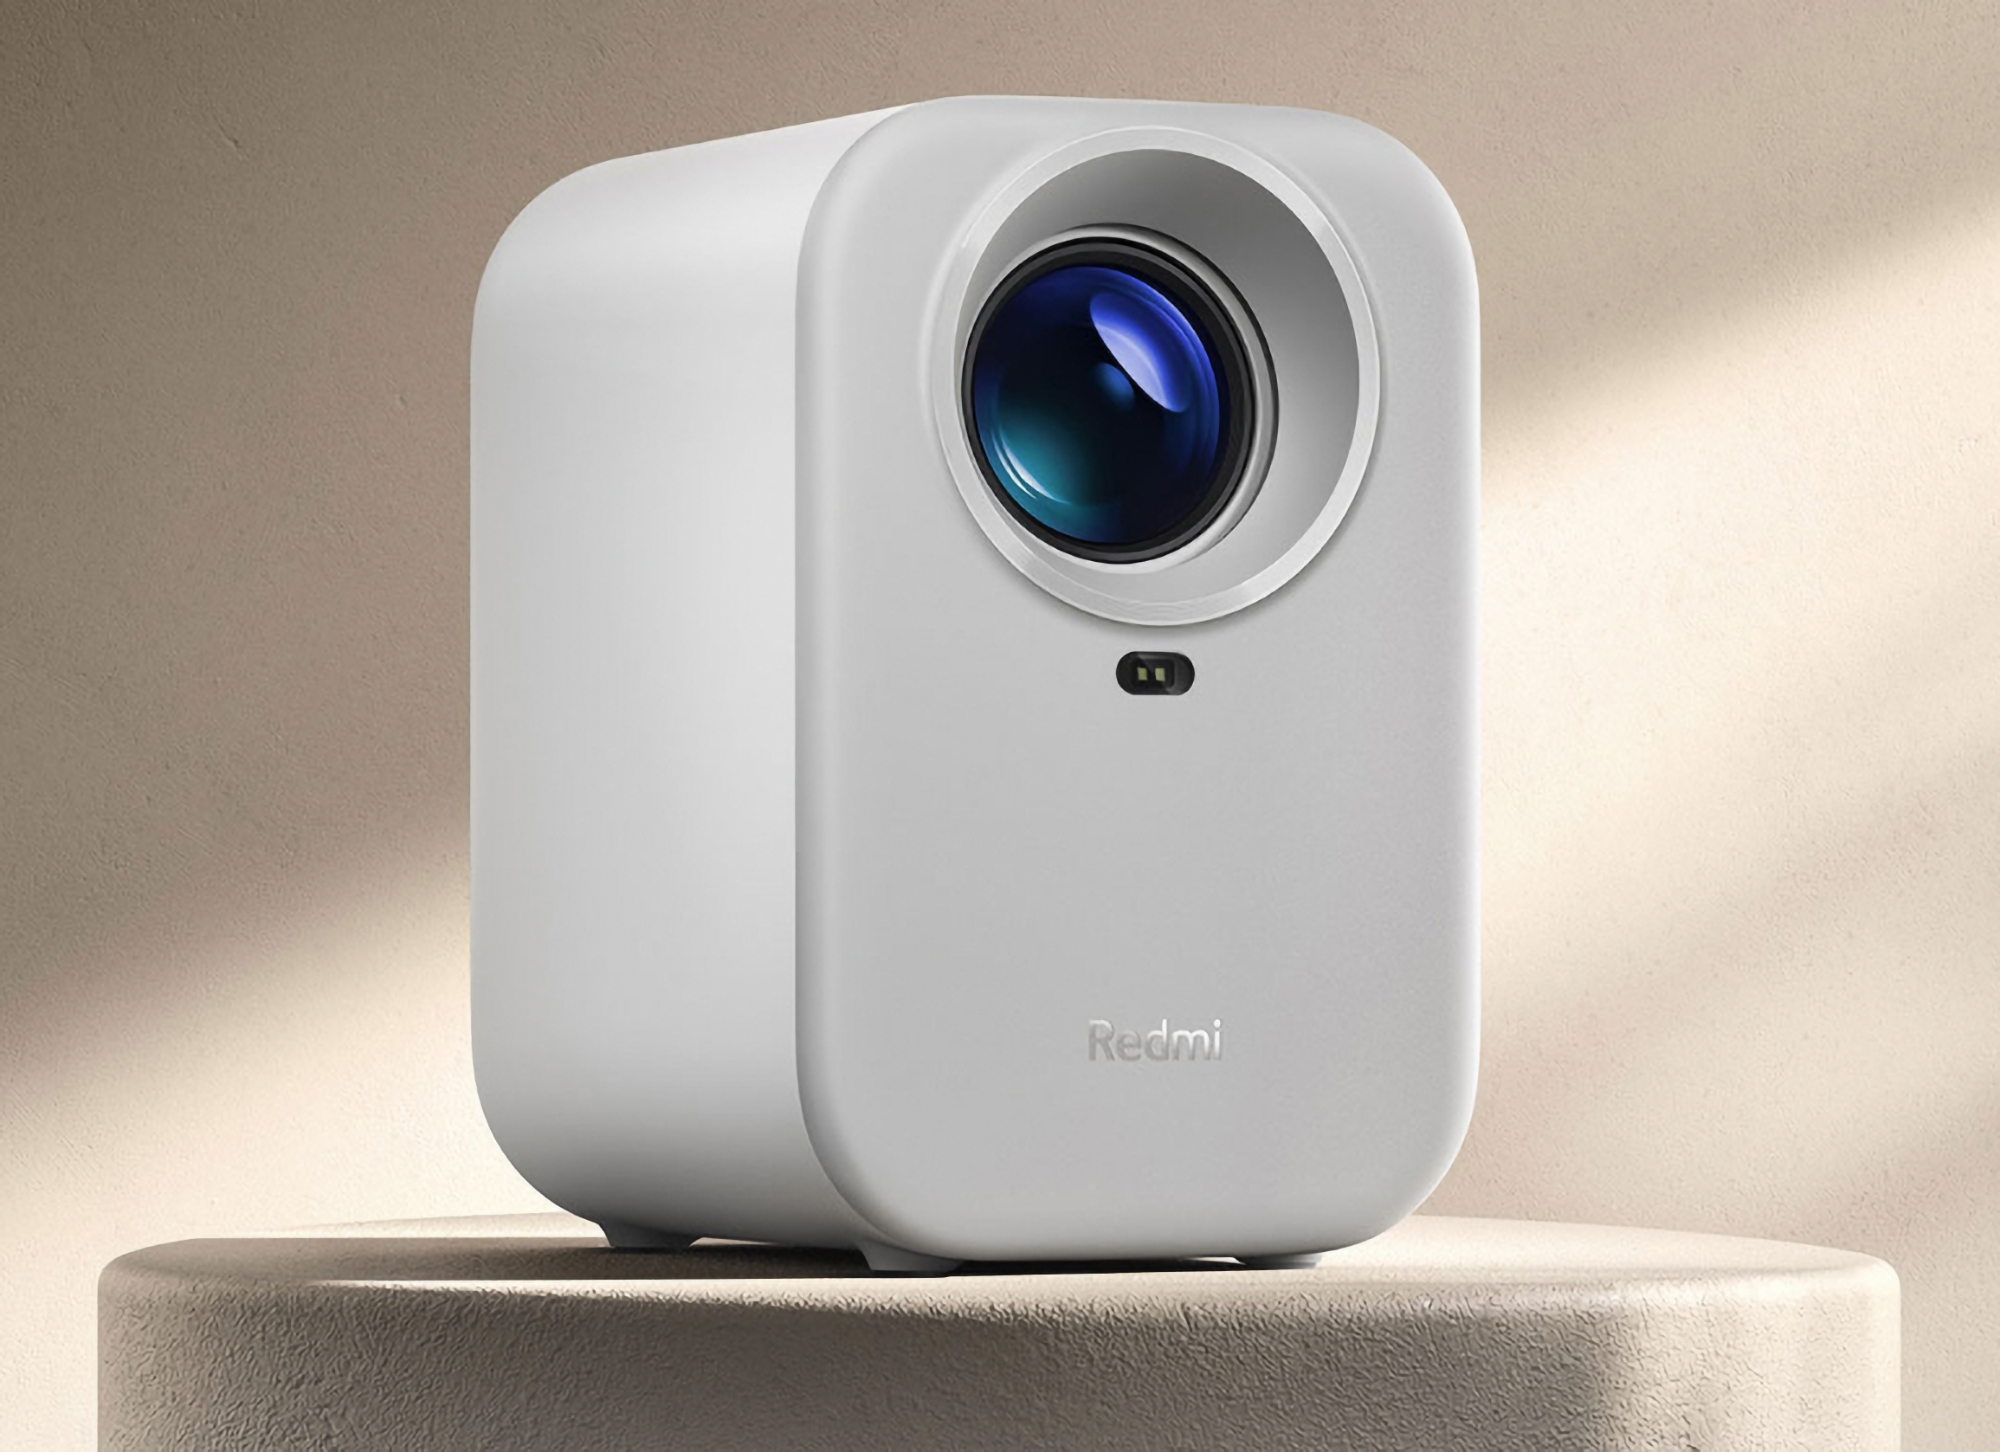 Xiaomi announced Redmi Projector Lite for $96, it can project FHD videos up to 100 inches diagonally